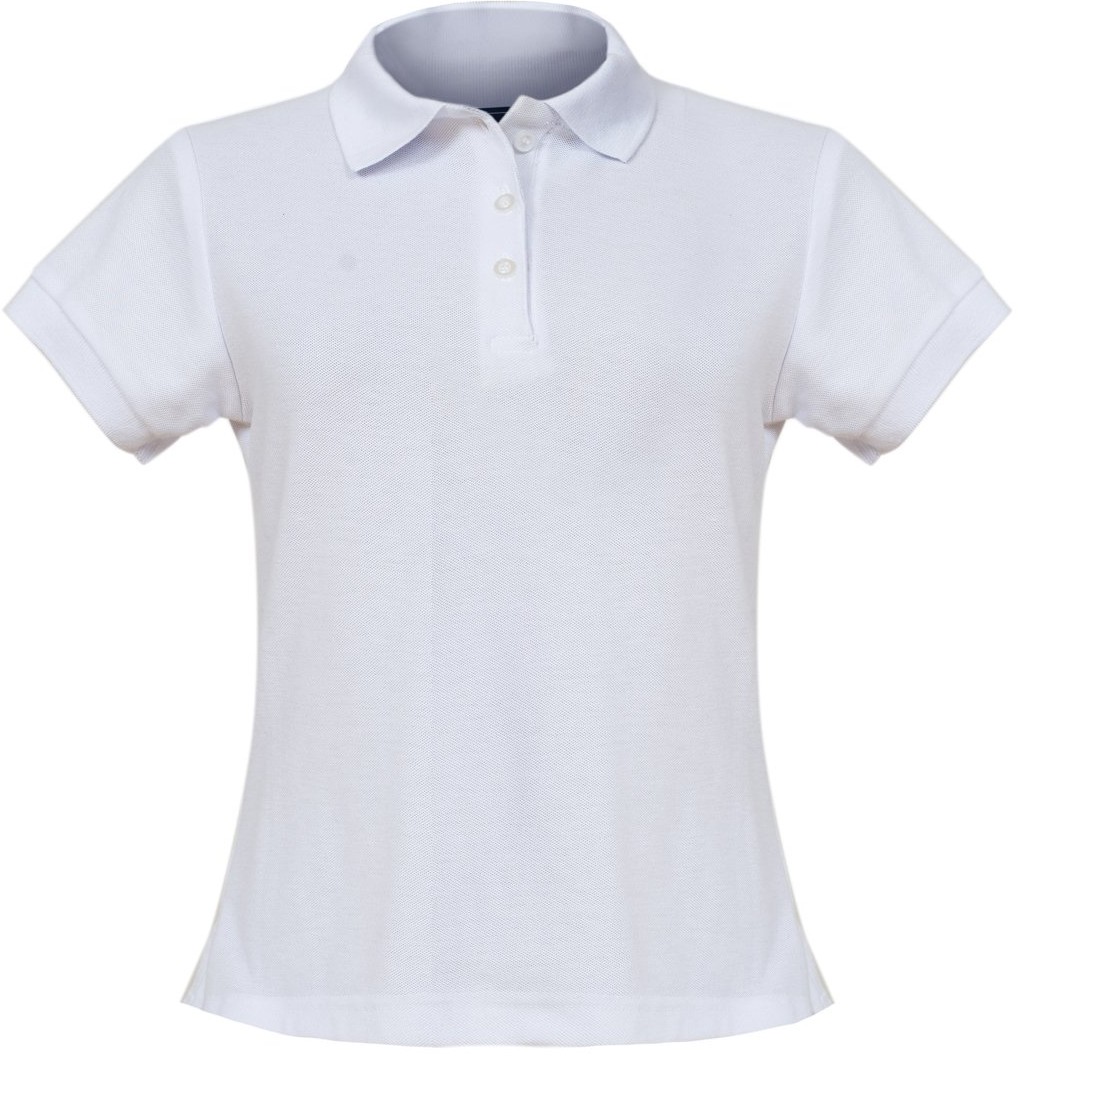 Polyester and Cotton Garment Polo Shirt- White Color- Holbox Style